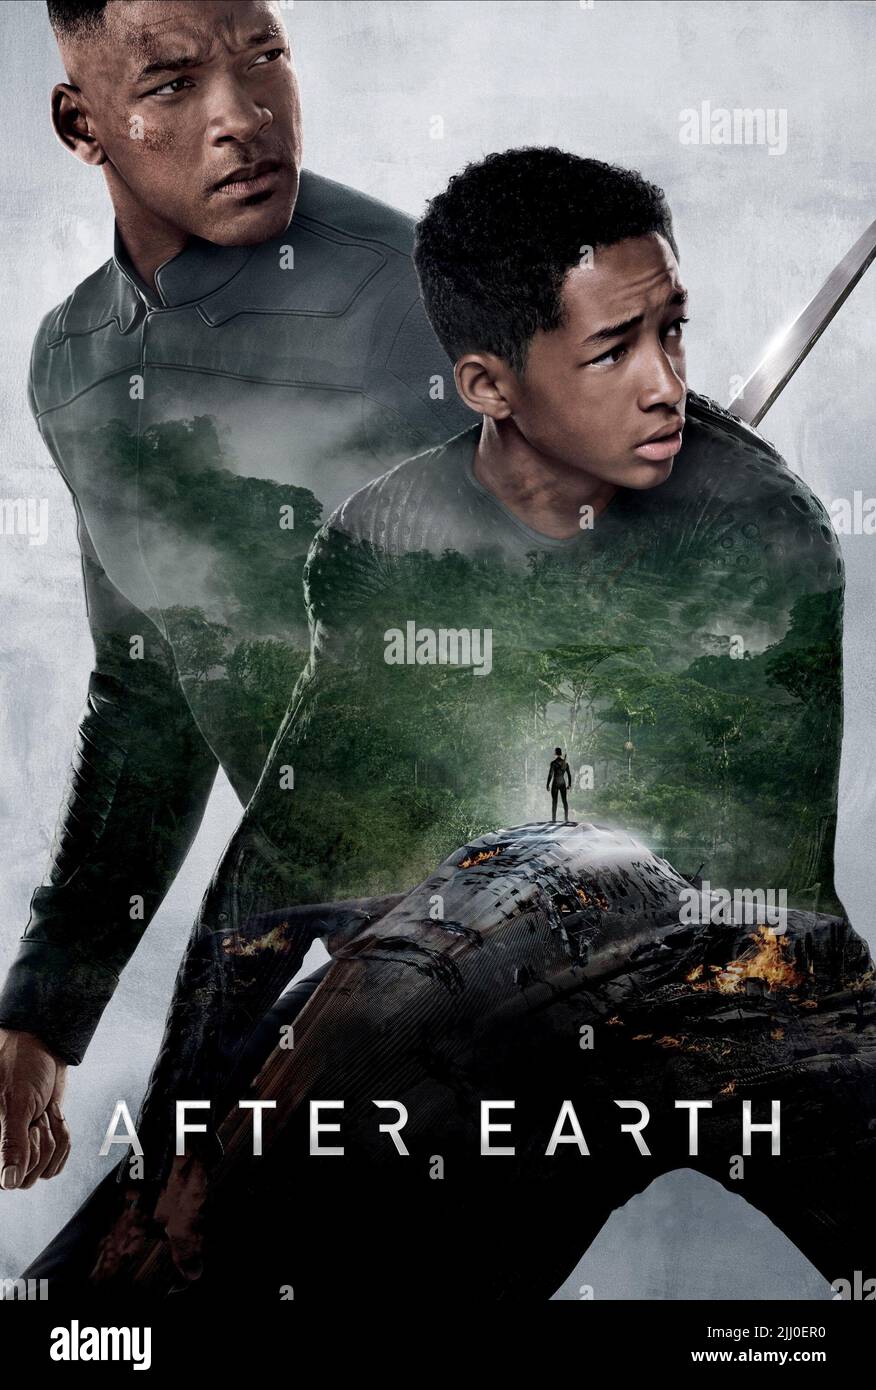 Will Smith And Jaden Smith Film After Earth Usa 2013 Characters Cypher Raige Kitai Raige